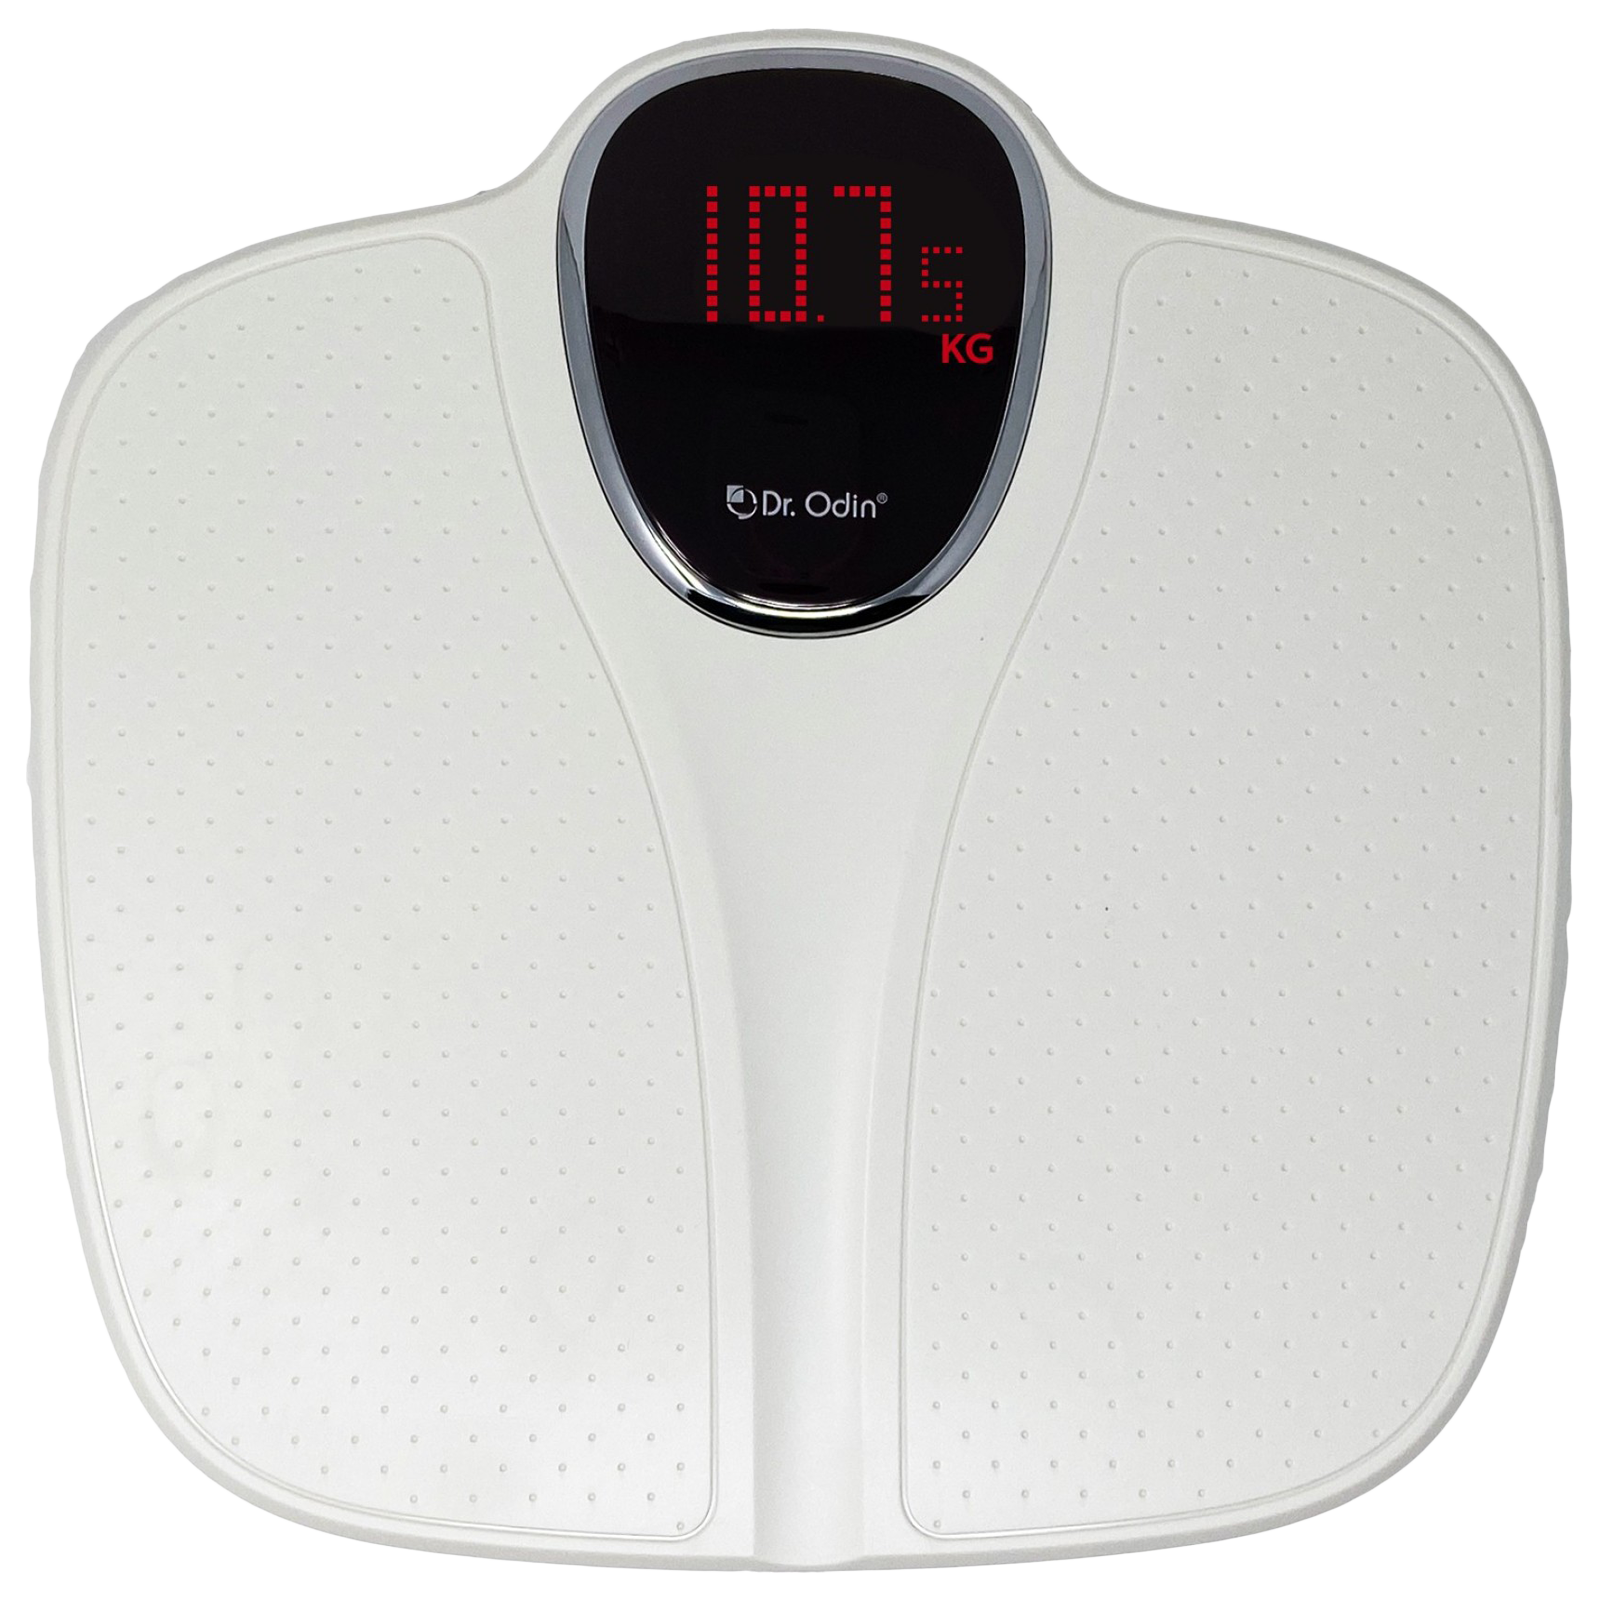 Dr. Odin Weight Scale (4 Sensor Technology, Accurate Reading, EB-7010, White)_1